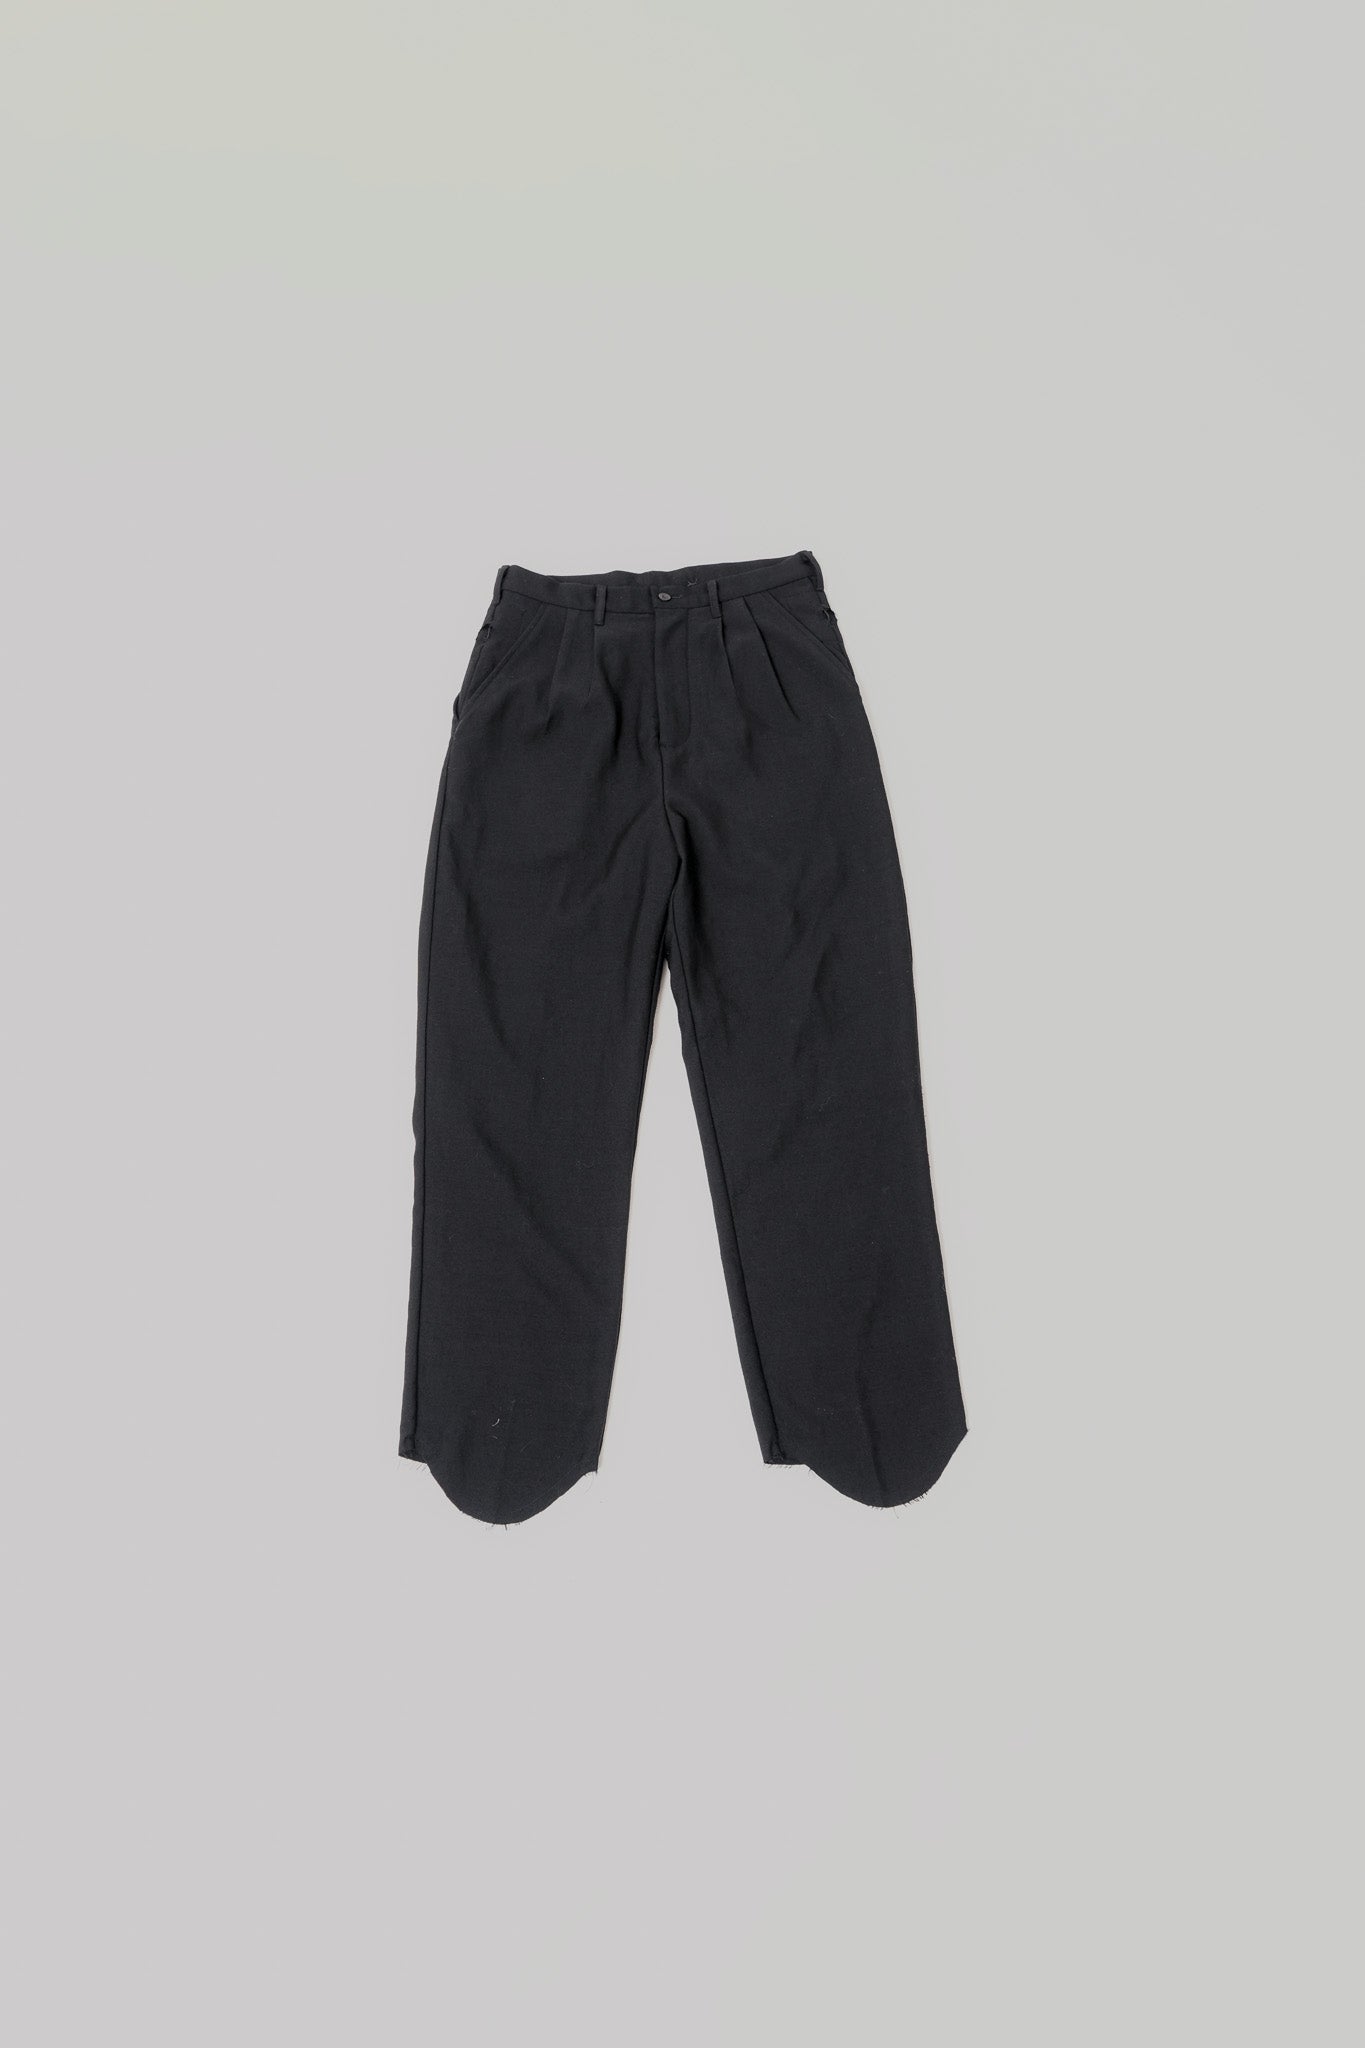 040 - Basic Straight Pants in Wool